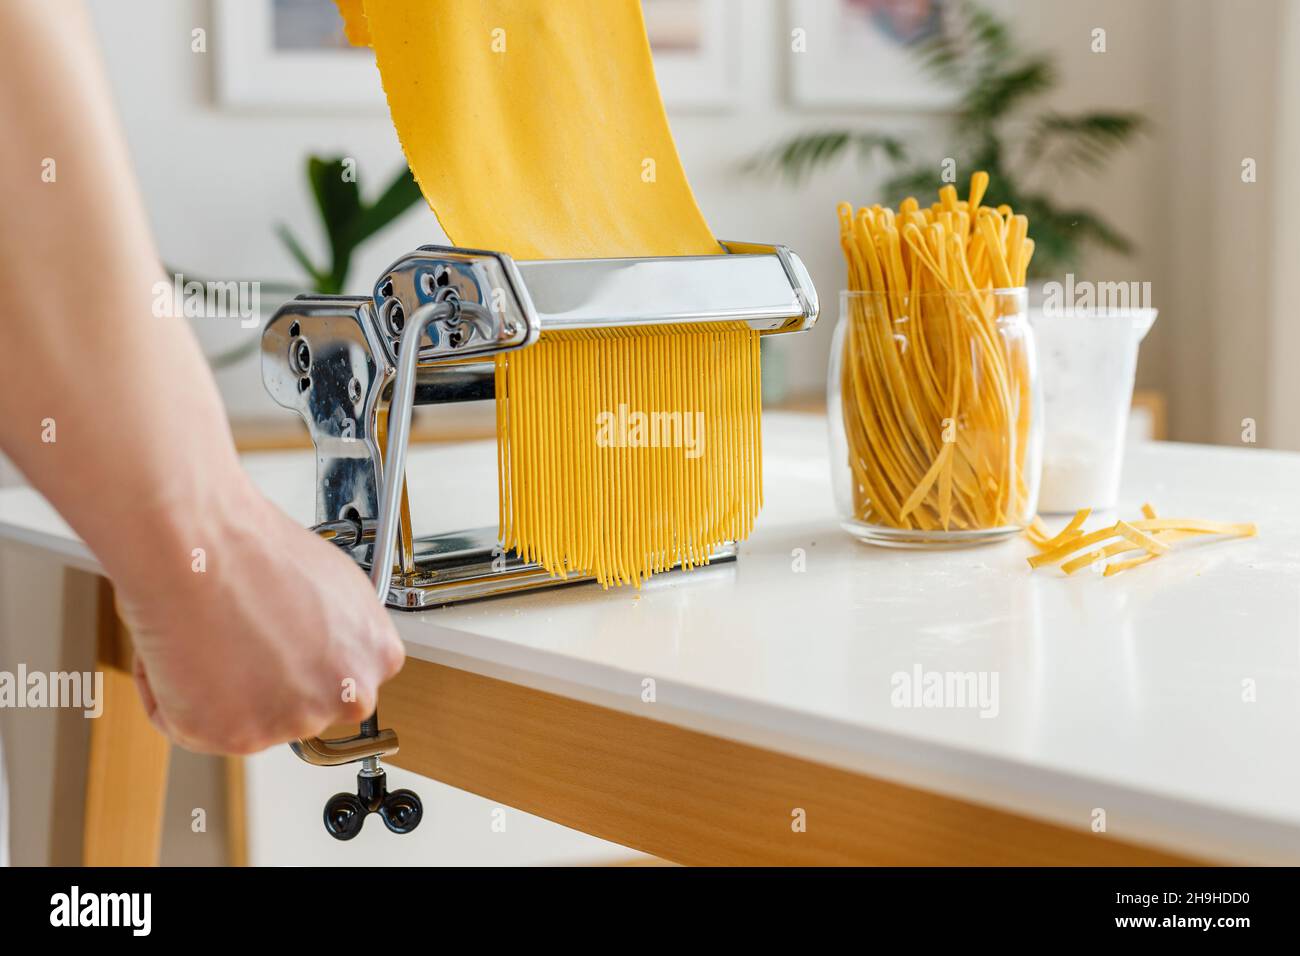 Man in apron making spaghetti with noodle cutter. Close-up pasta